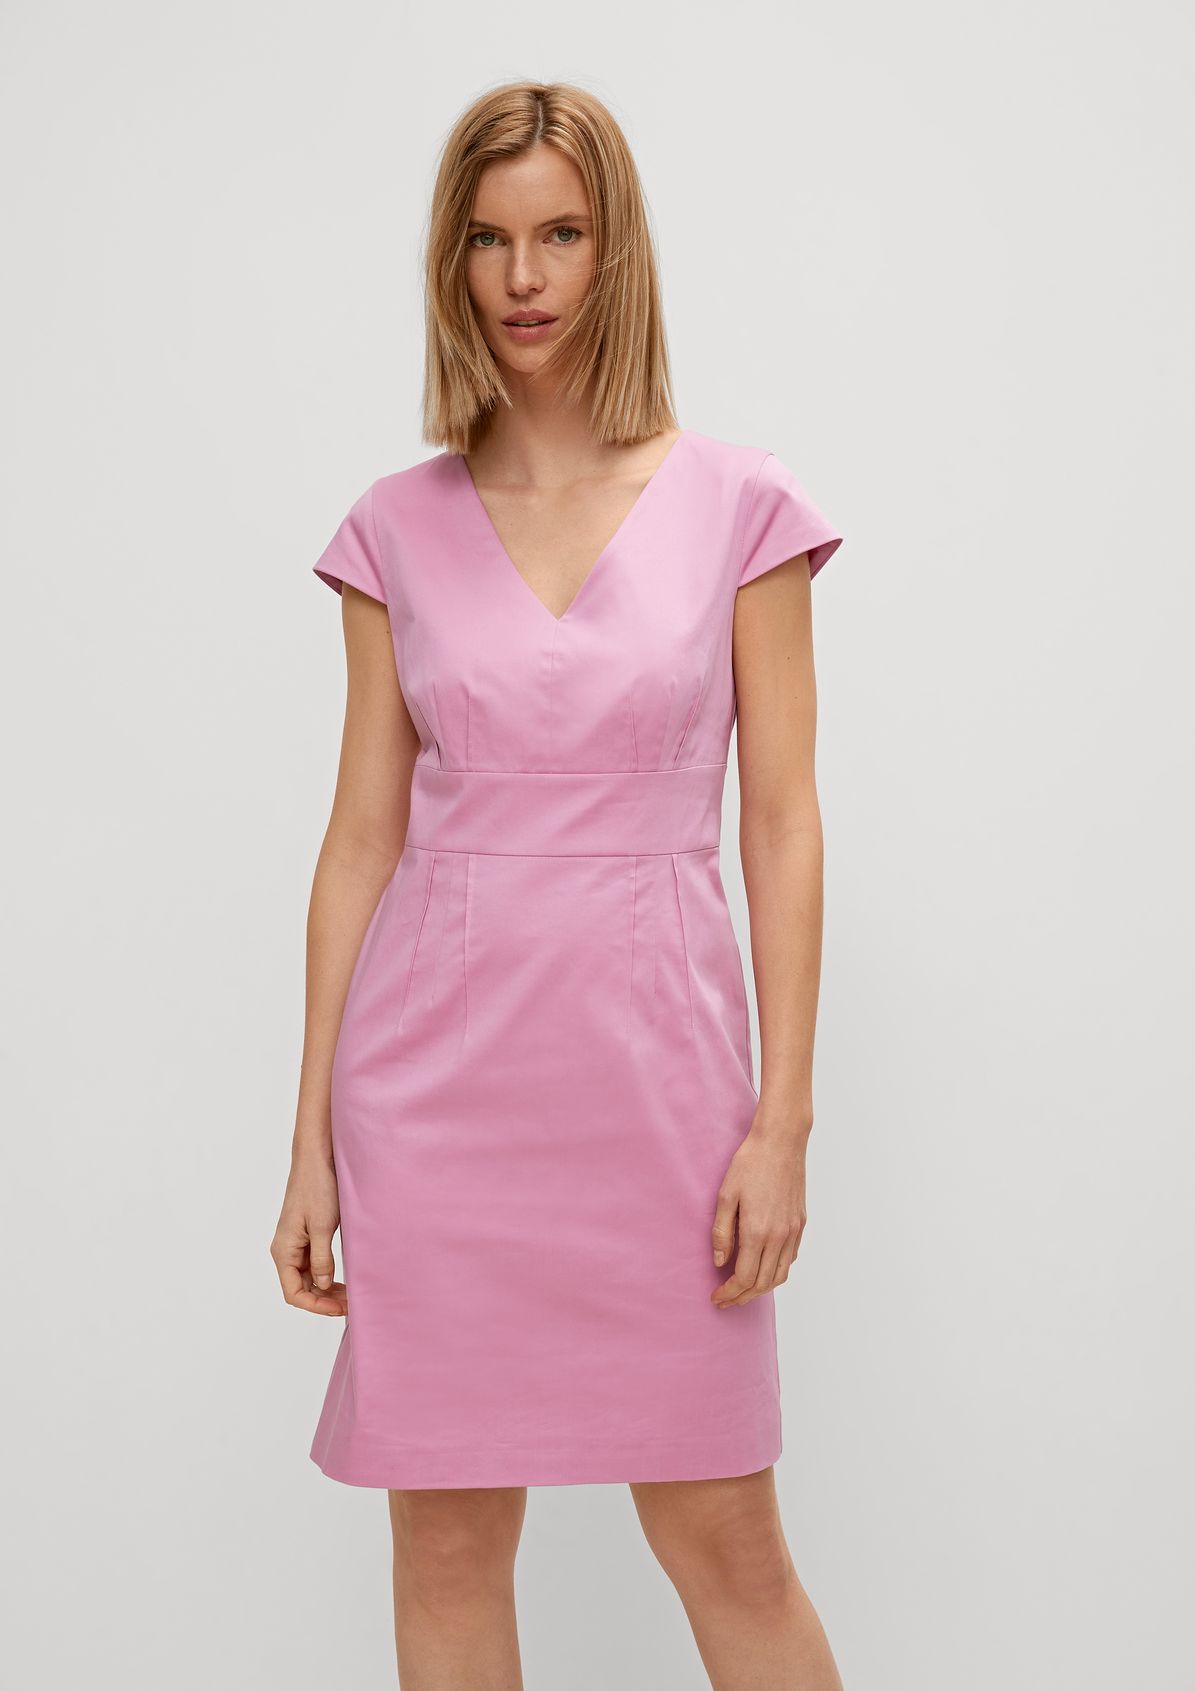 Sheath dress with cap sleeves from comma